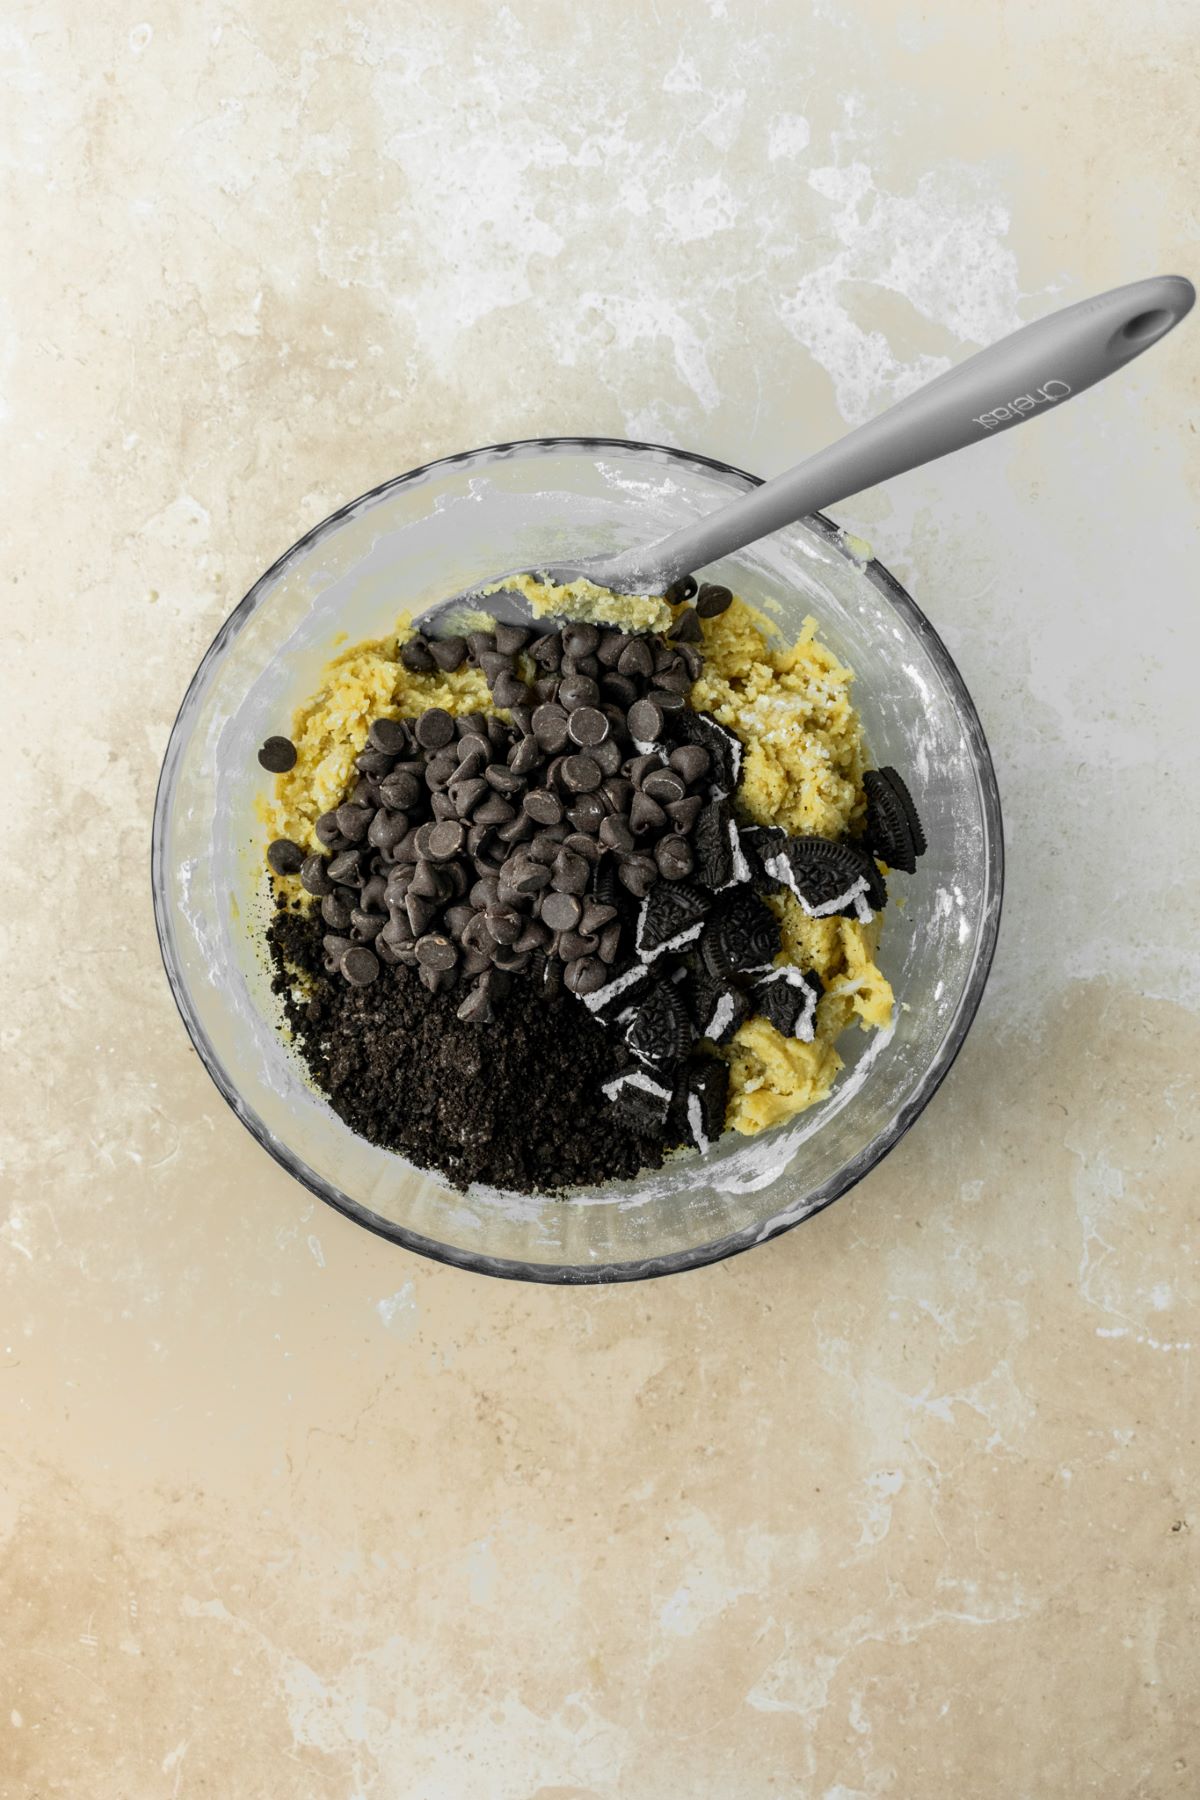 Cookie dough with Oreo crumbs, pieces, and chocolate chips on top.